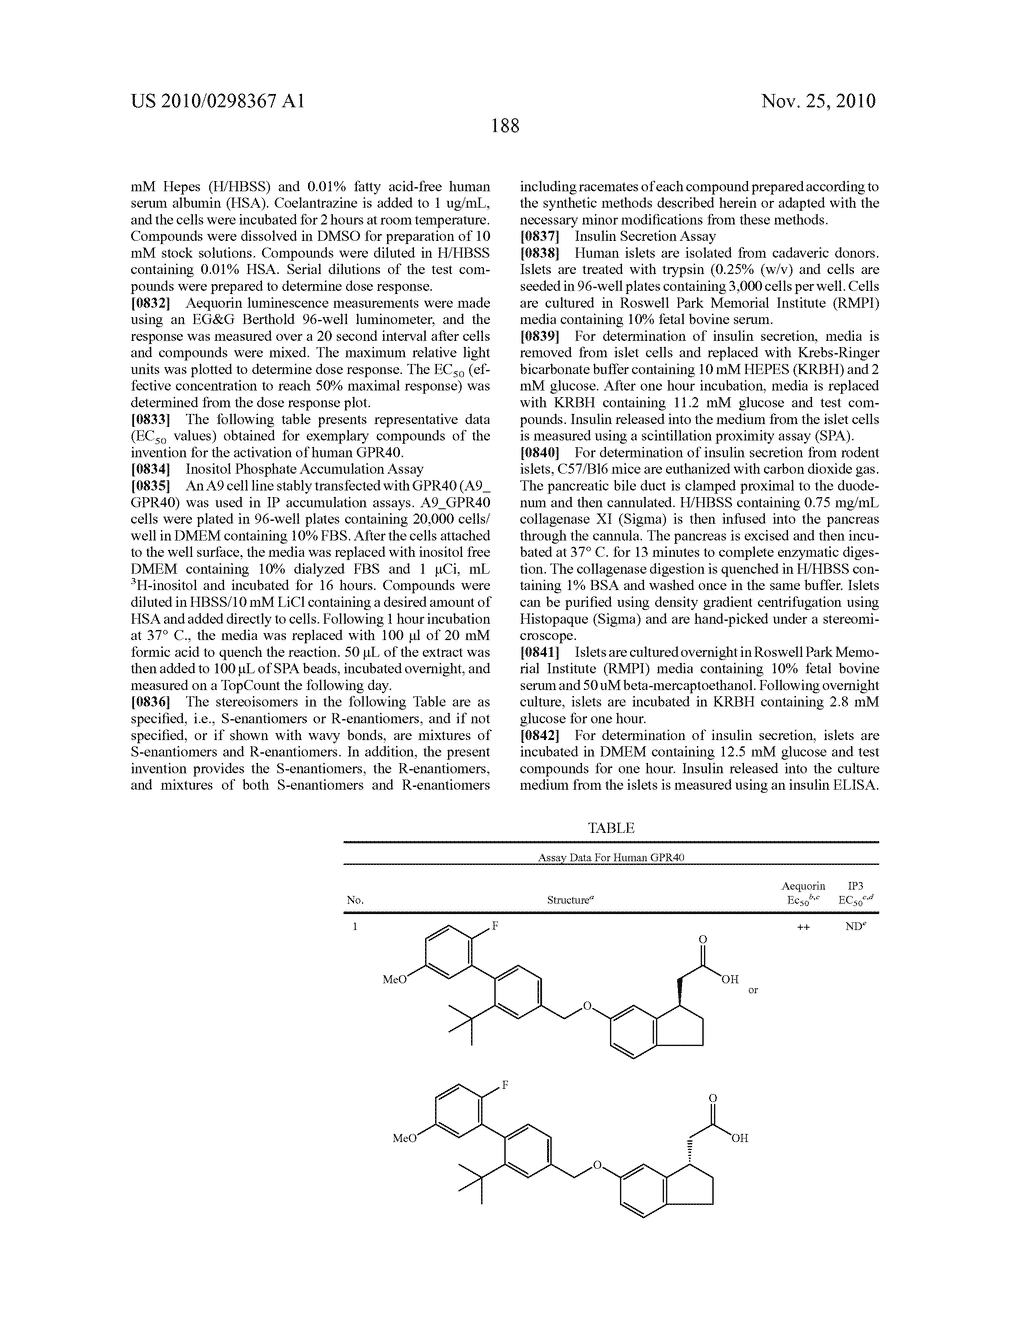 Conformationally Constrained Carboxylic Acid Derivatives Useful for Treating Metabolic Disorders - diagram, schematic, and image 190